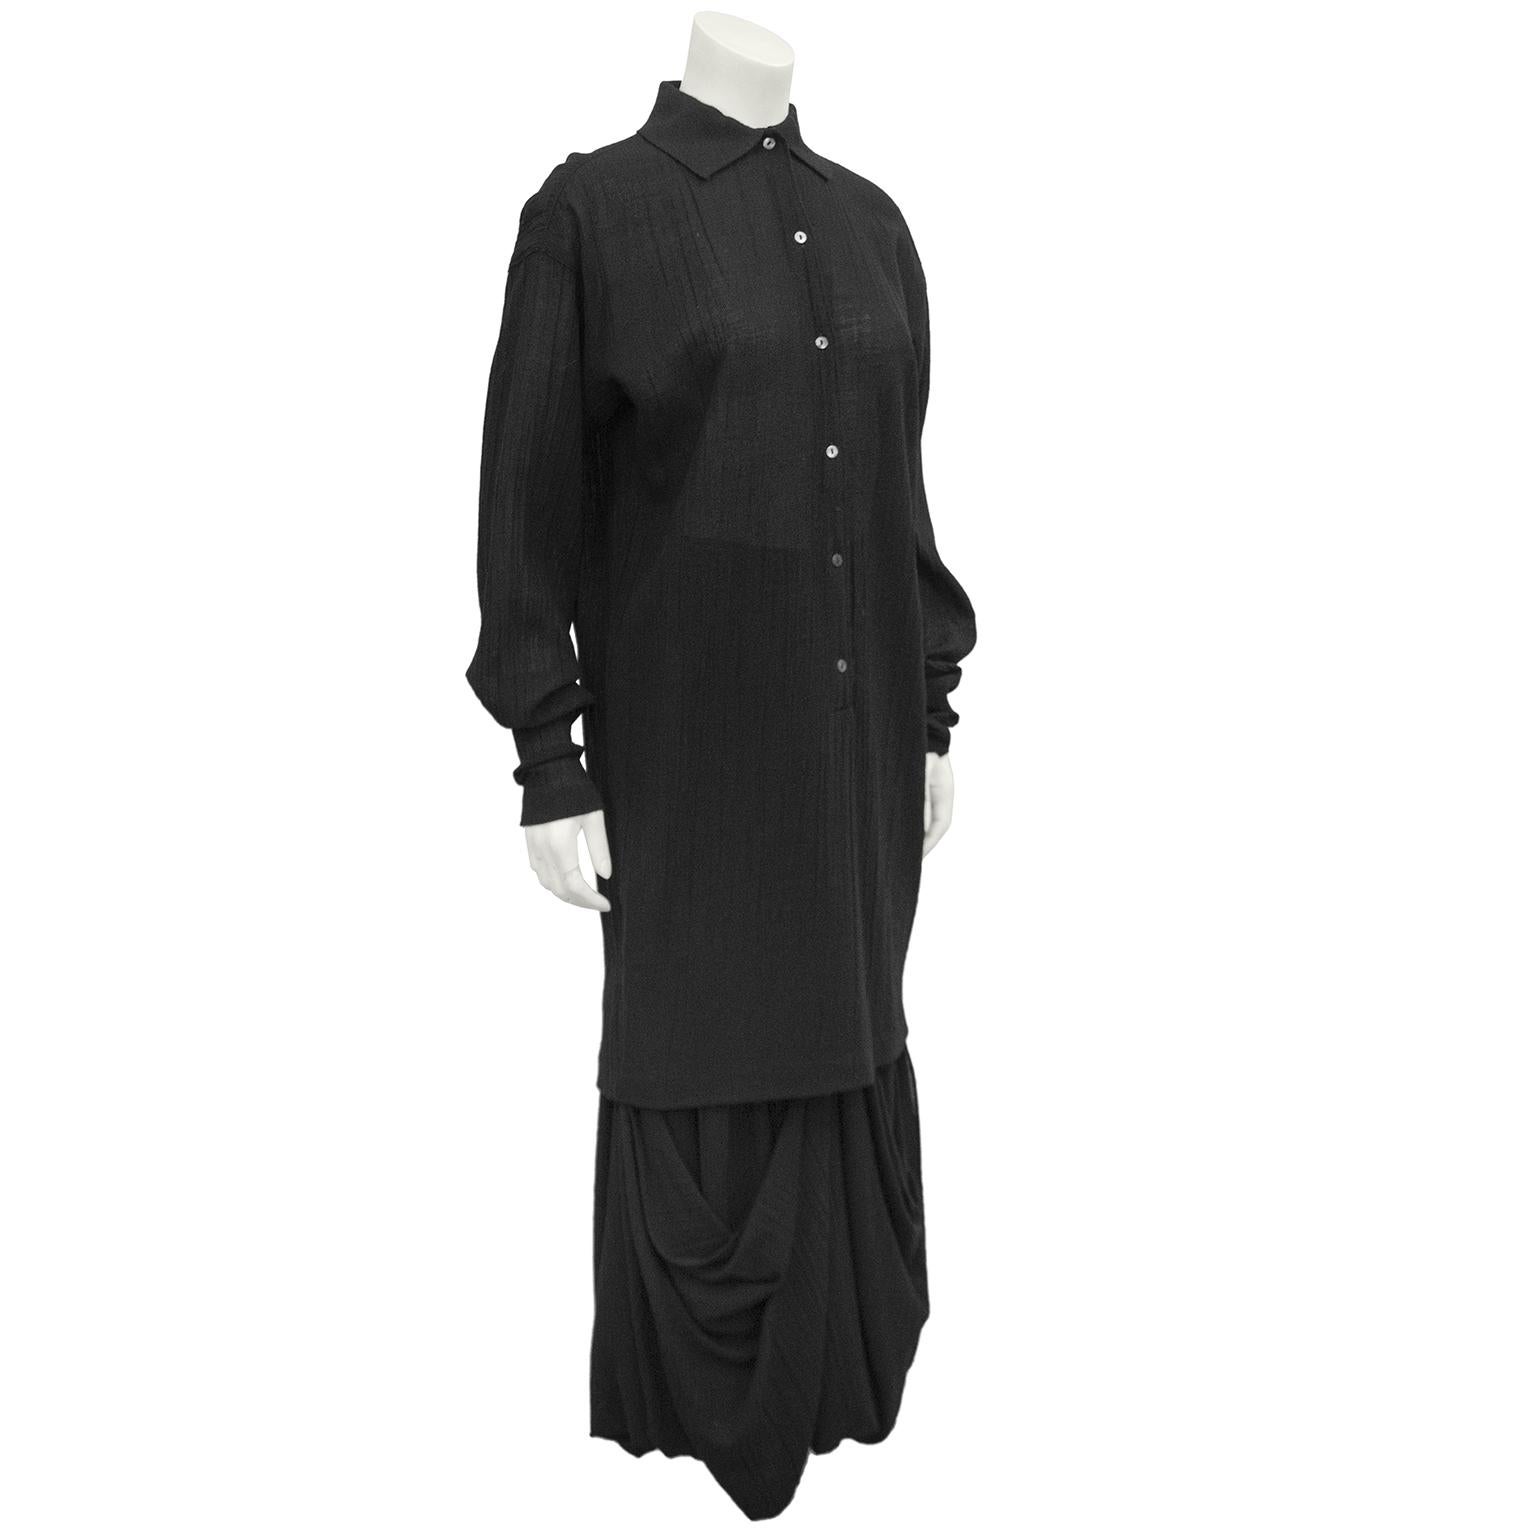 1980s Romeo Gigli black natural cotton ensemble. Long tunic blouse with a knit collar and small grey mother of pearl buttons. Loose fit through body, but tapers towards hem. High waisted maxi skirt with ruching and large pick ups creating beautiful